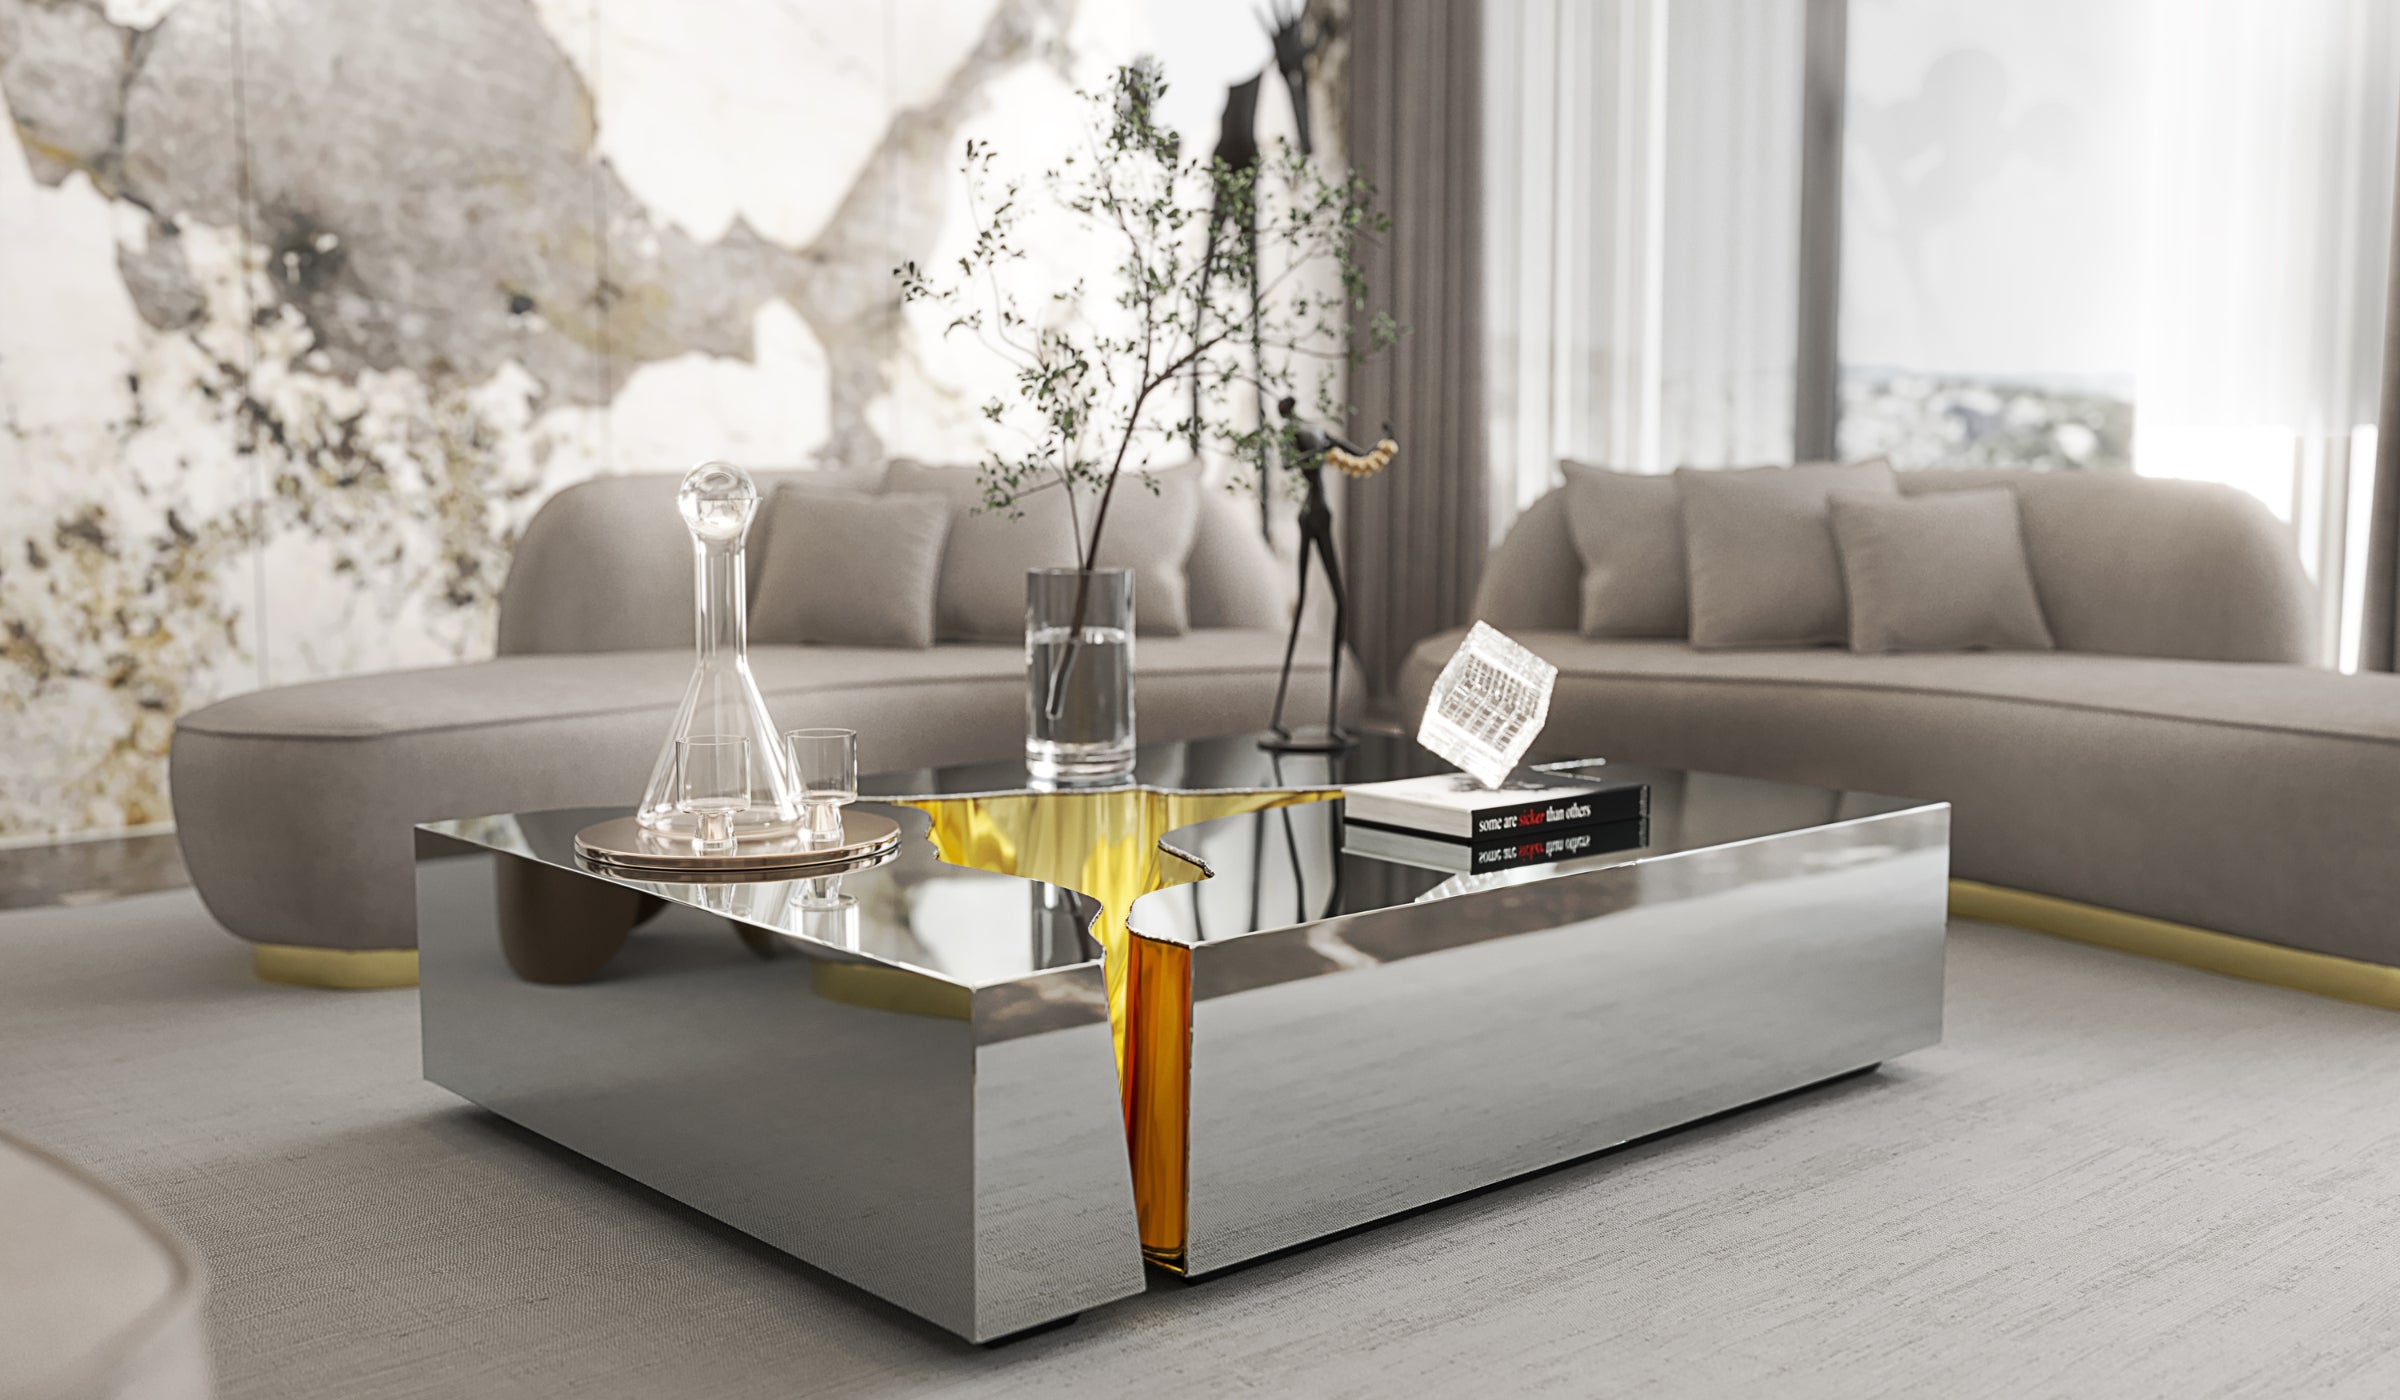 Lapiaz - Sculptural coffee table, elegance and refinement in mirror-effect stainless steel and brass